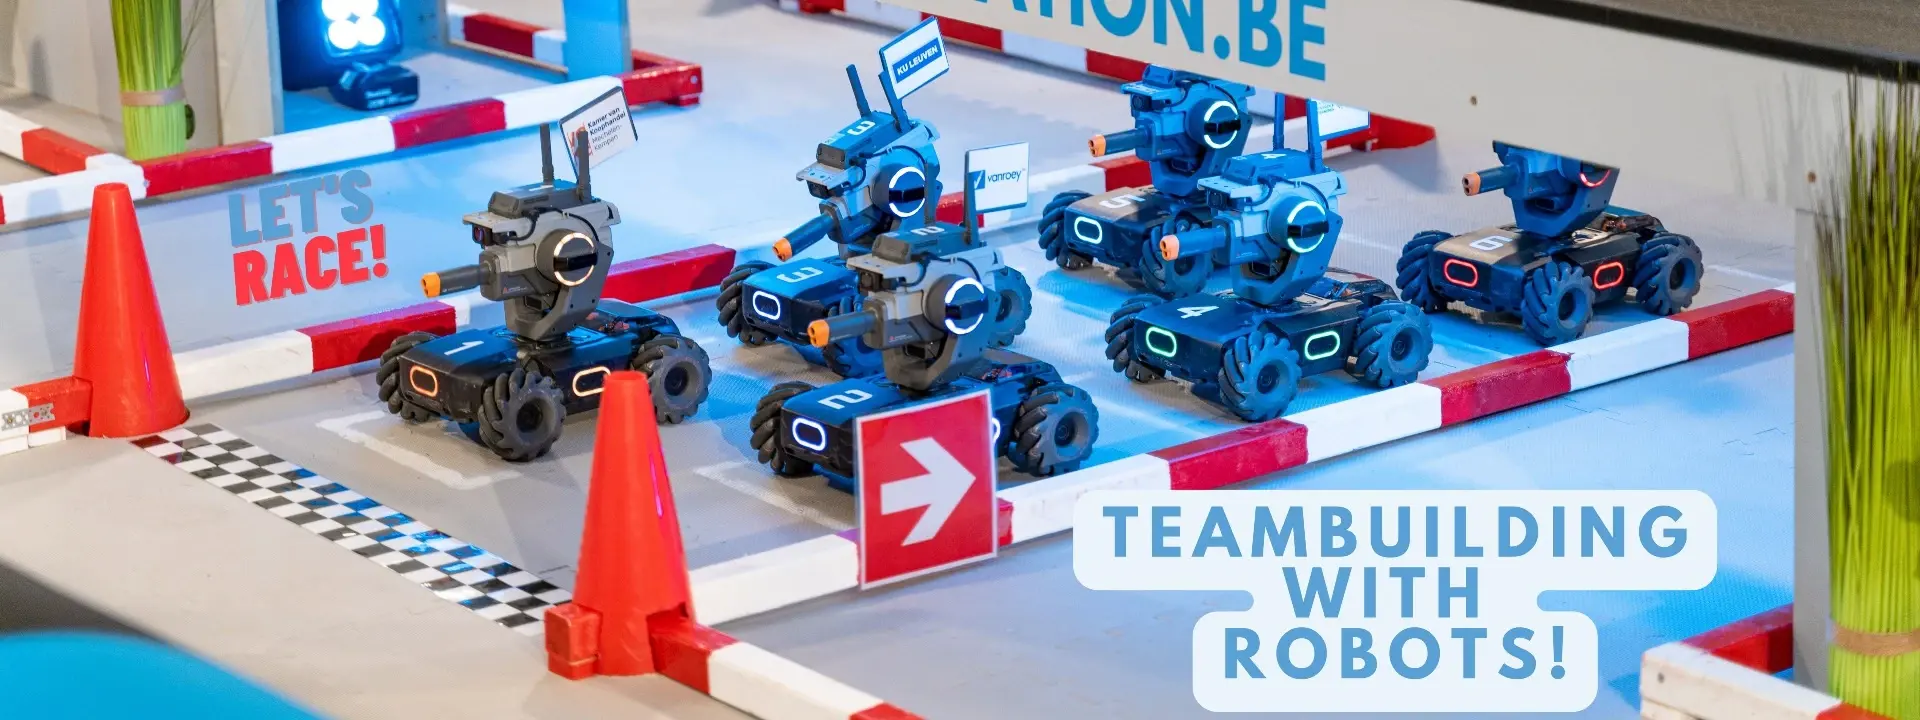 Teambuilding with robots!